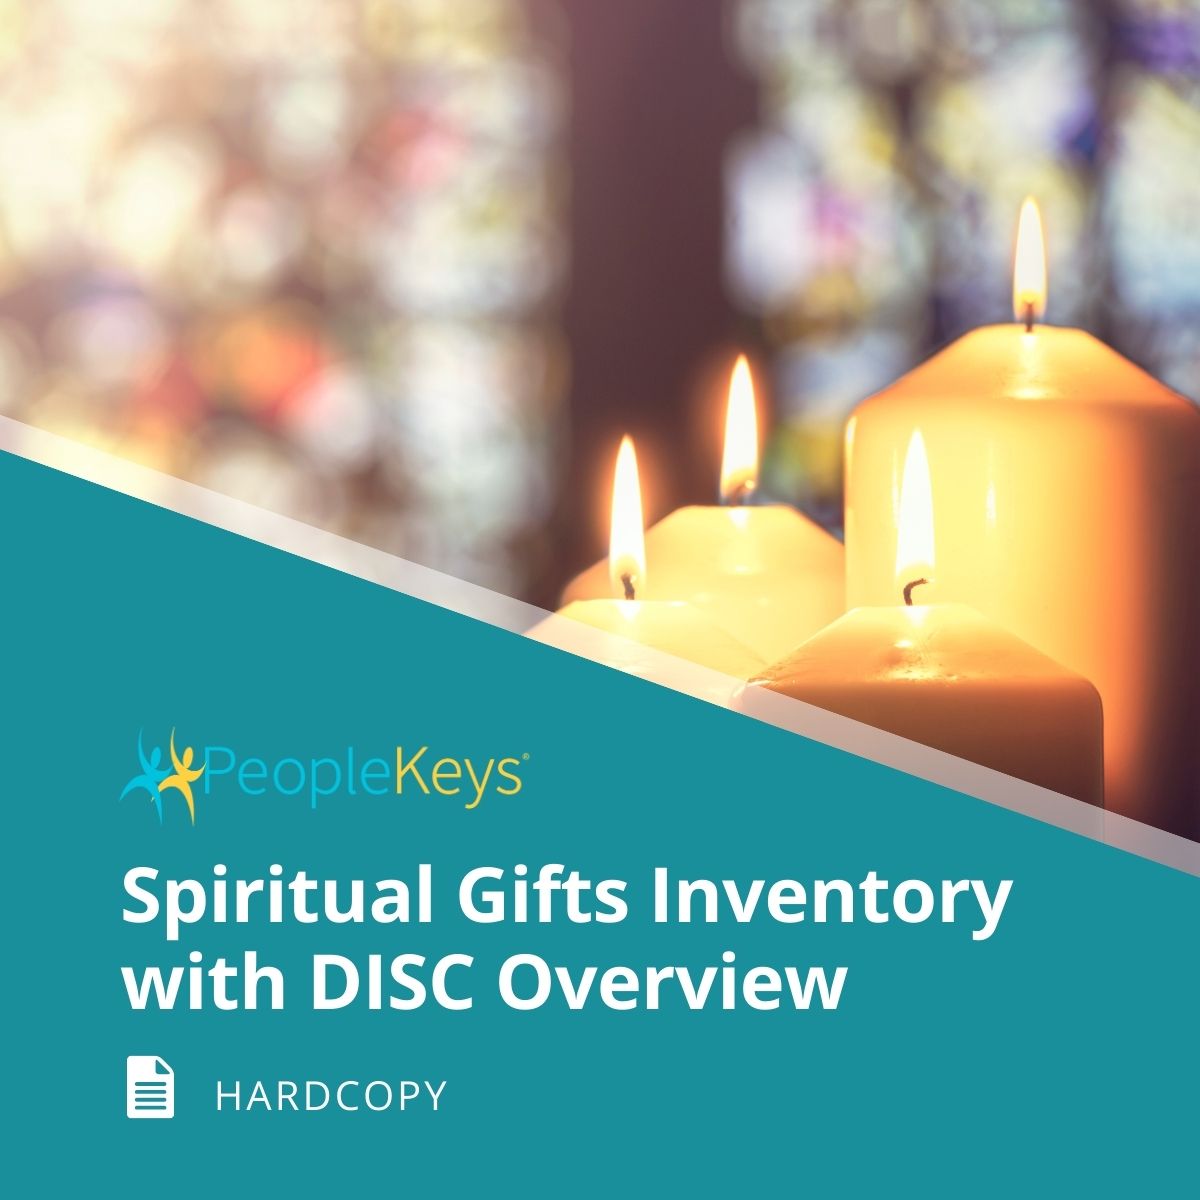 Spiritual Gifts Inventory with DISC Overview (Hardcopy)